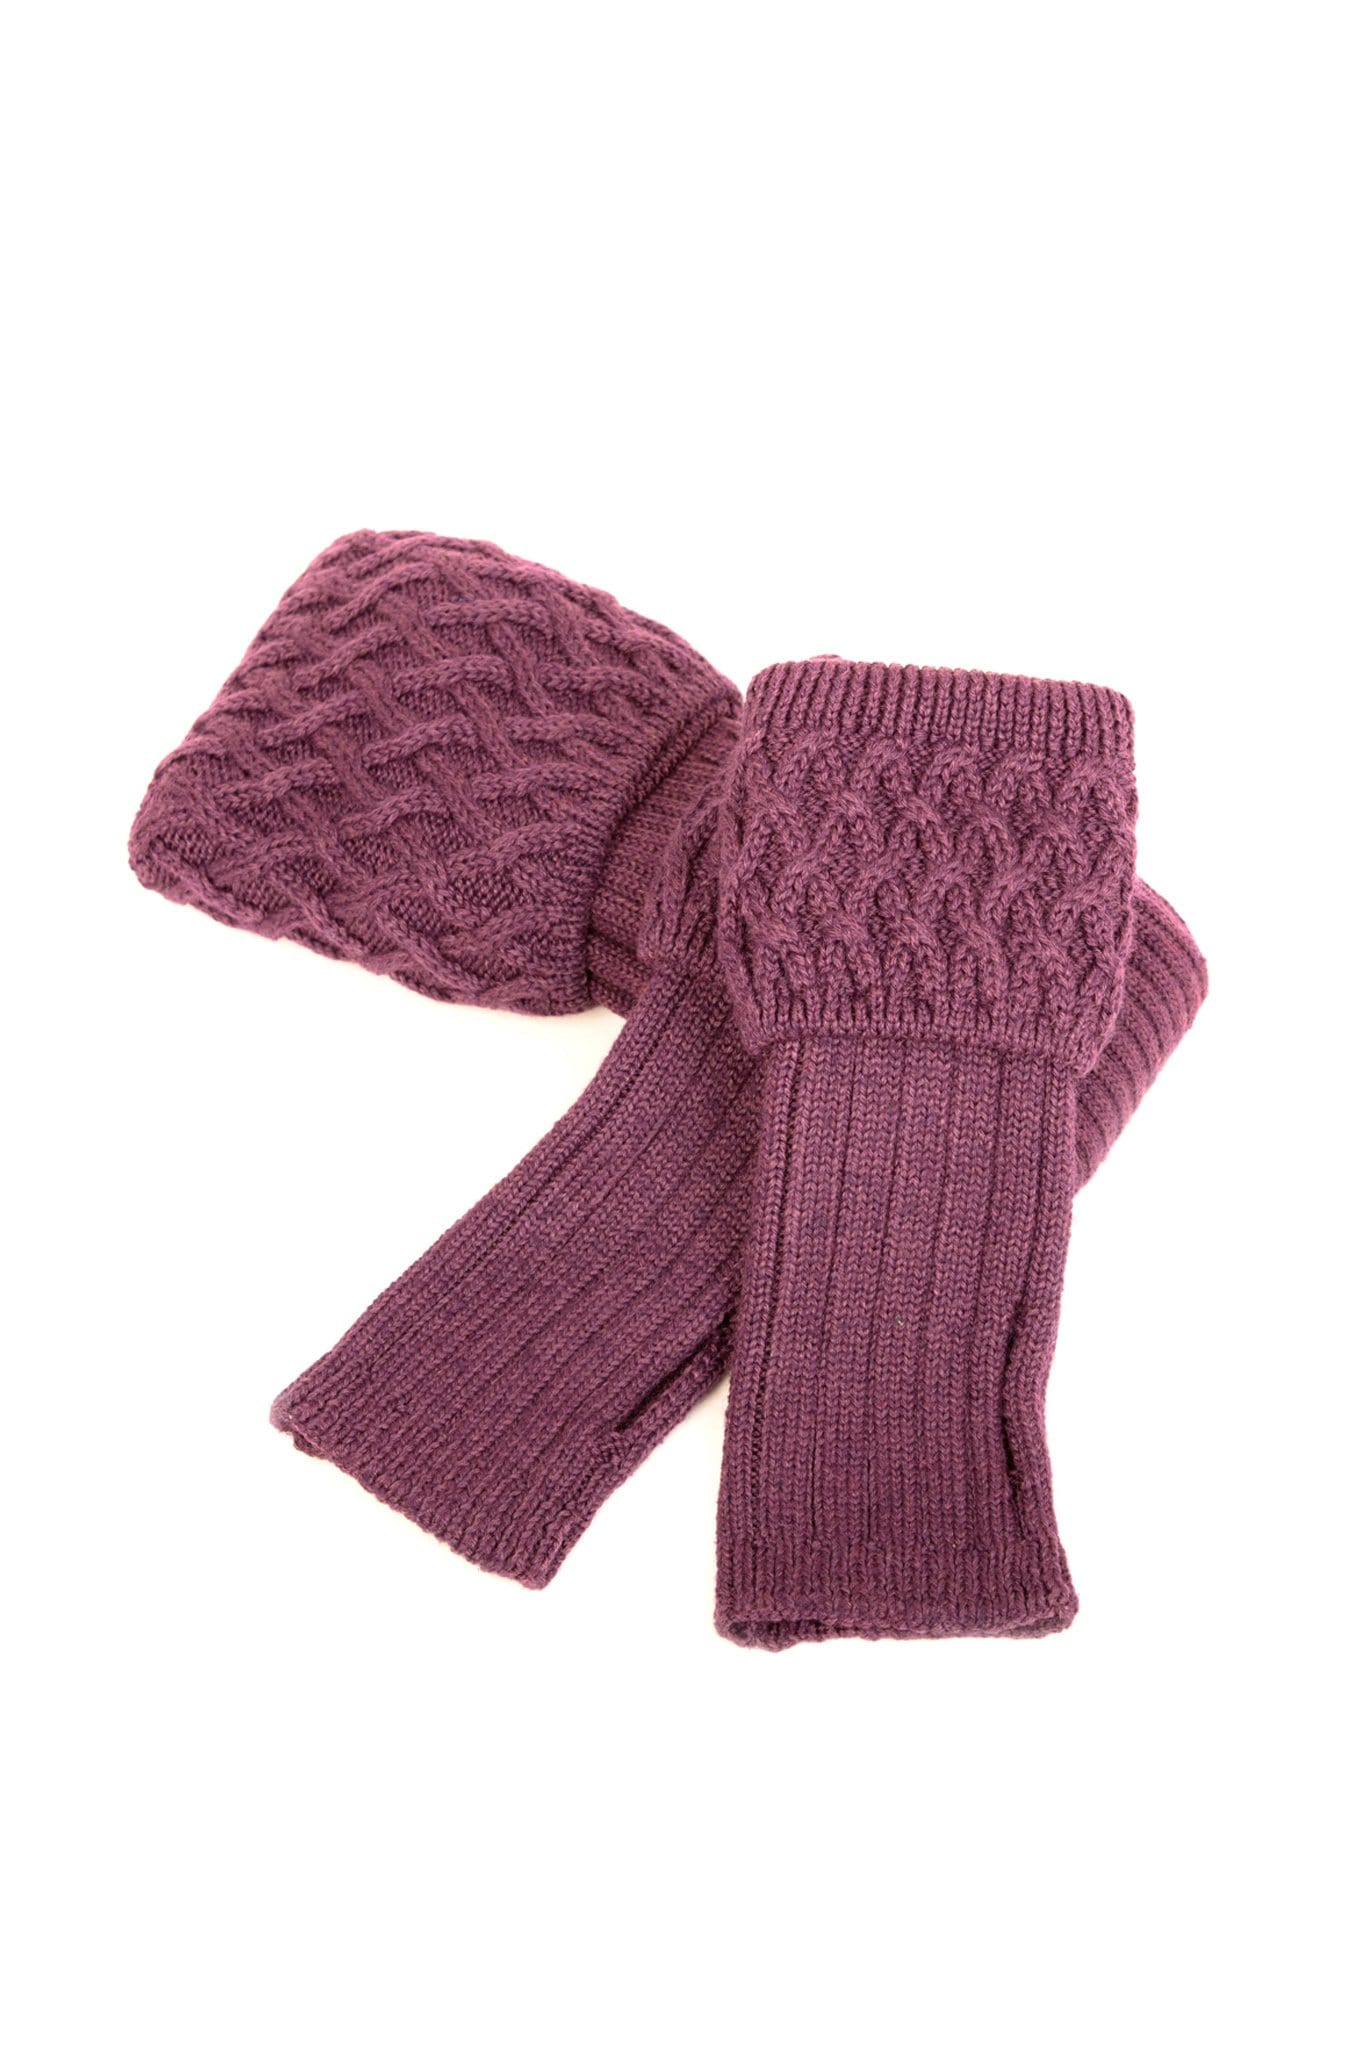 House of Cheviot Gloves House of Cheviot Ladies Wrist Warmers Thistle